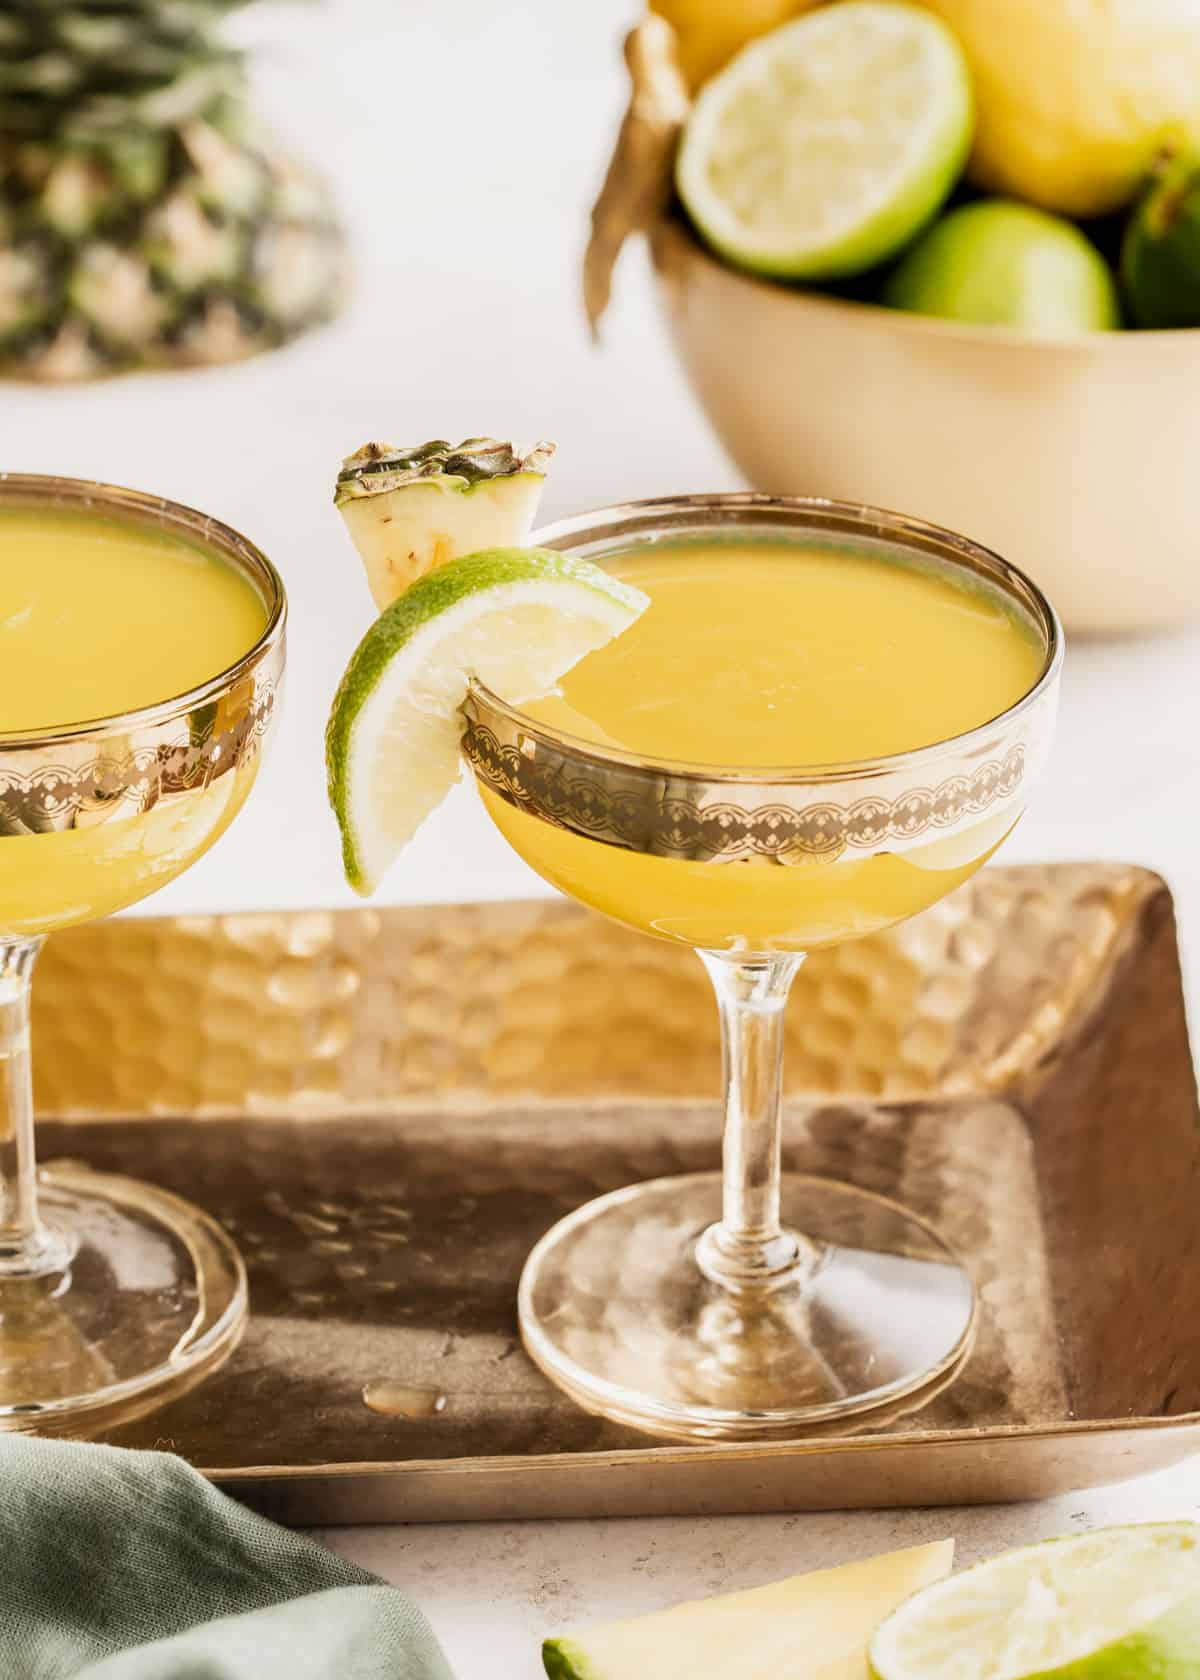 golden colored drink in coupe glass with lime and pineapple garnish, on gold tray.